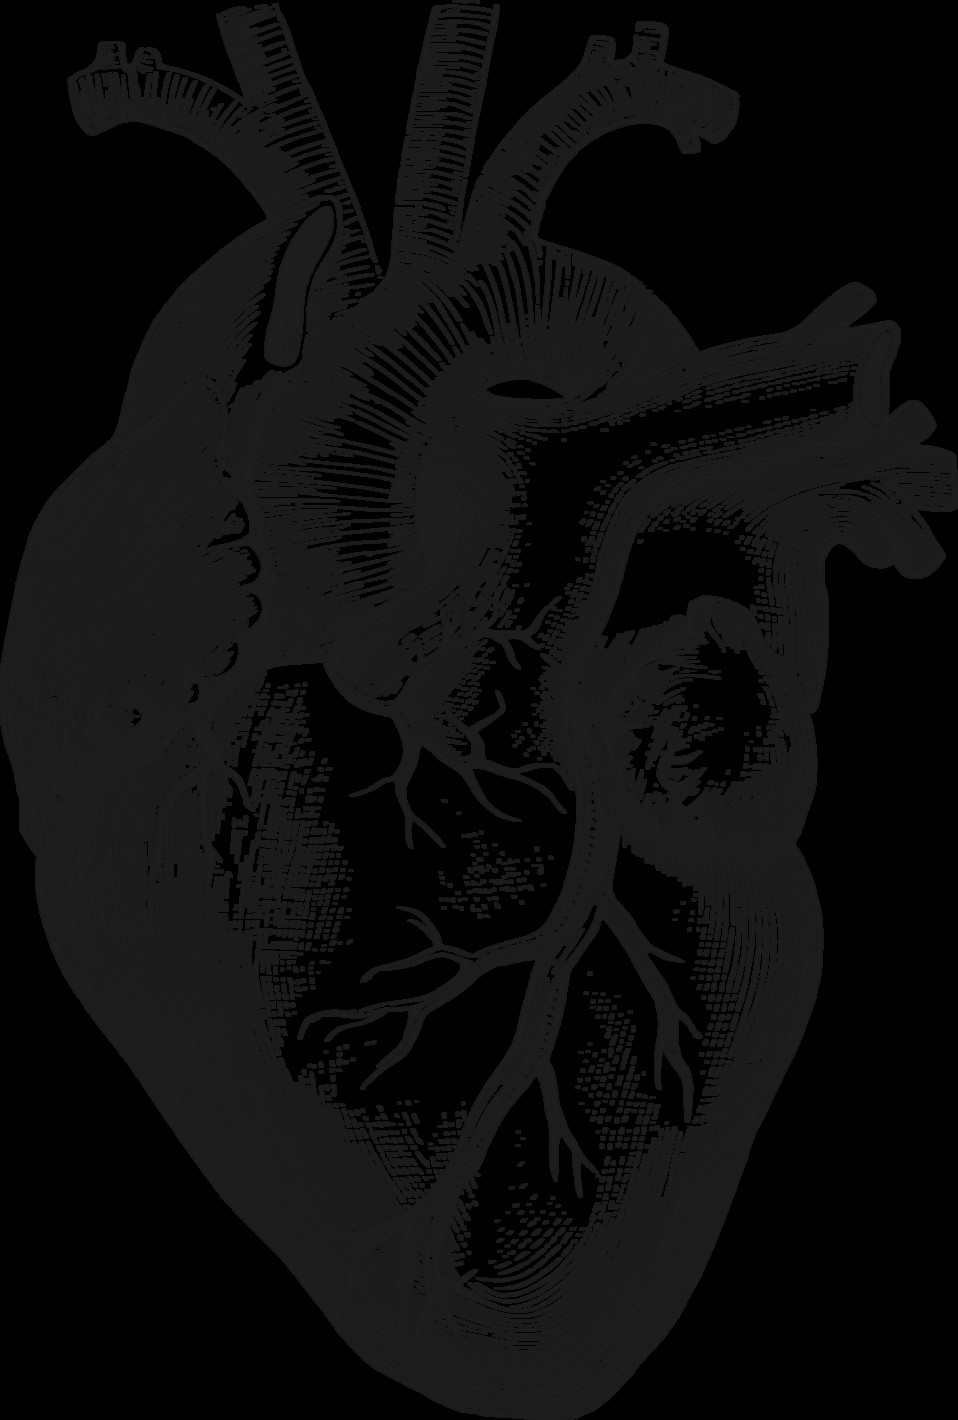 anatomical heart anatomical heart drawing heart images body painting collage body art